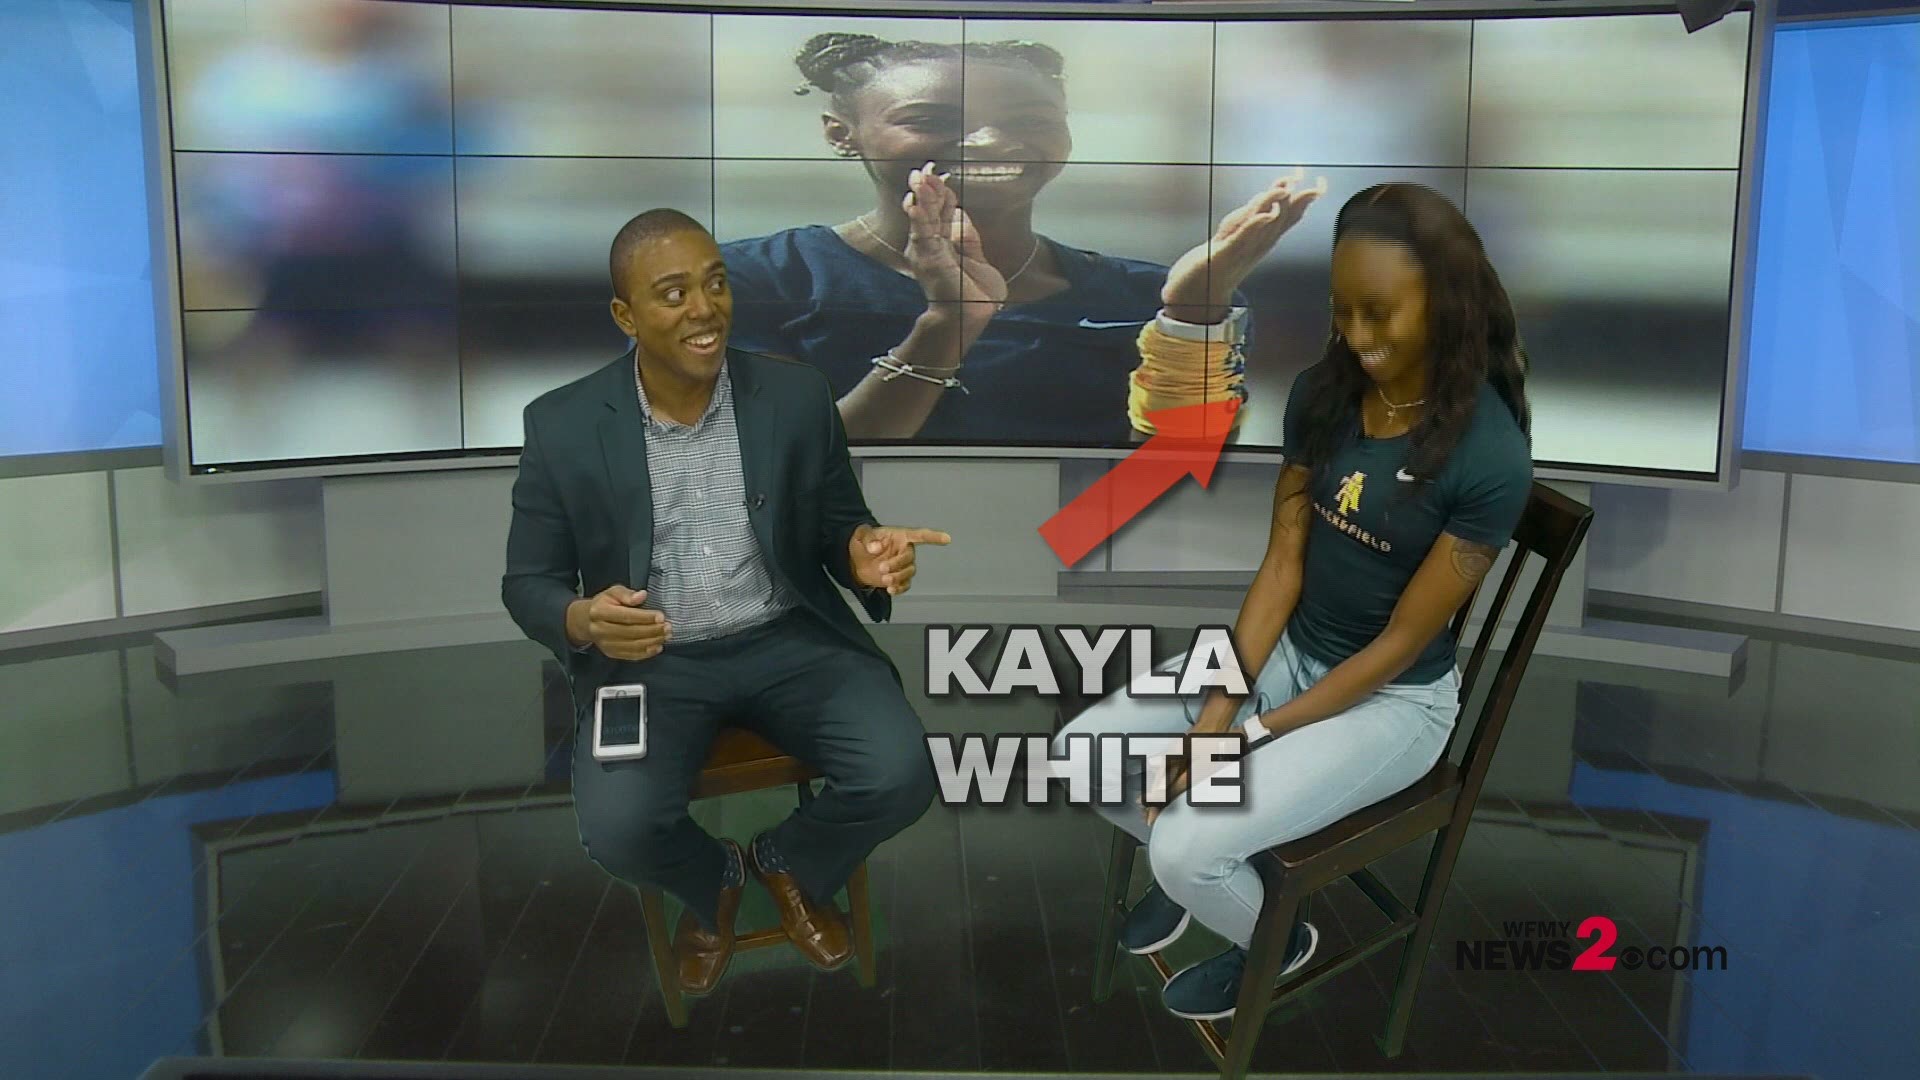 Kayla White finished the 200-meter sprint with the fastest time in the world this year at the indoor Tyson Invitational at the University of Arkansas. Tuesday, she sat down with WFMY News 2's Patrick Wright for one minute of rapid-fire questions.